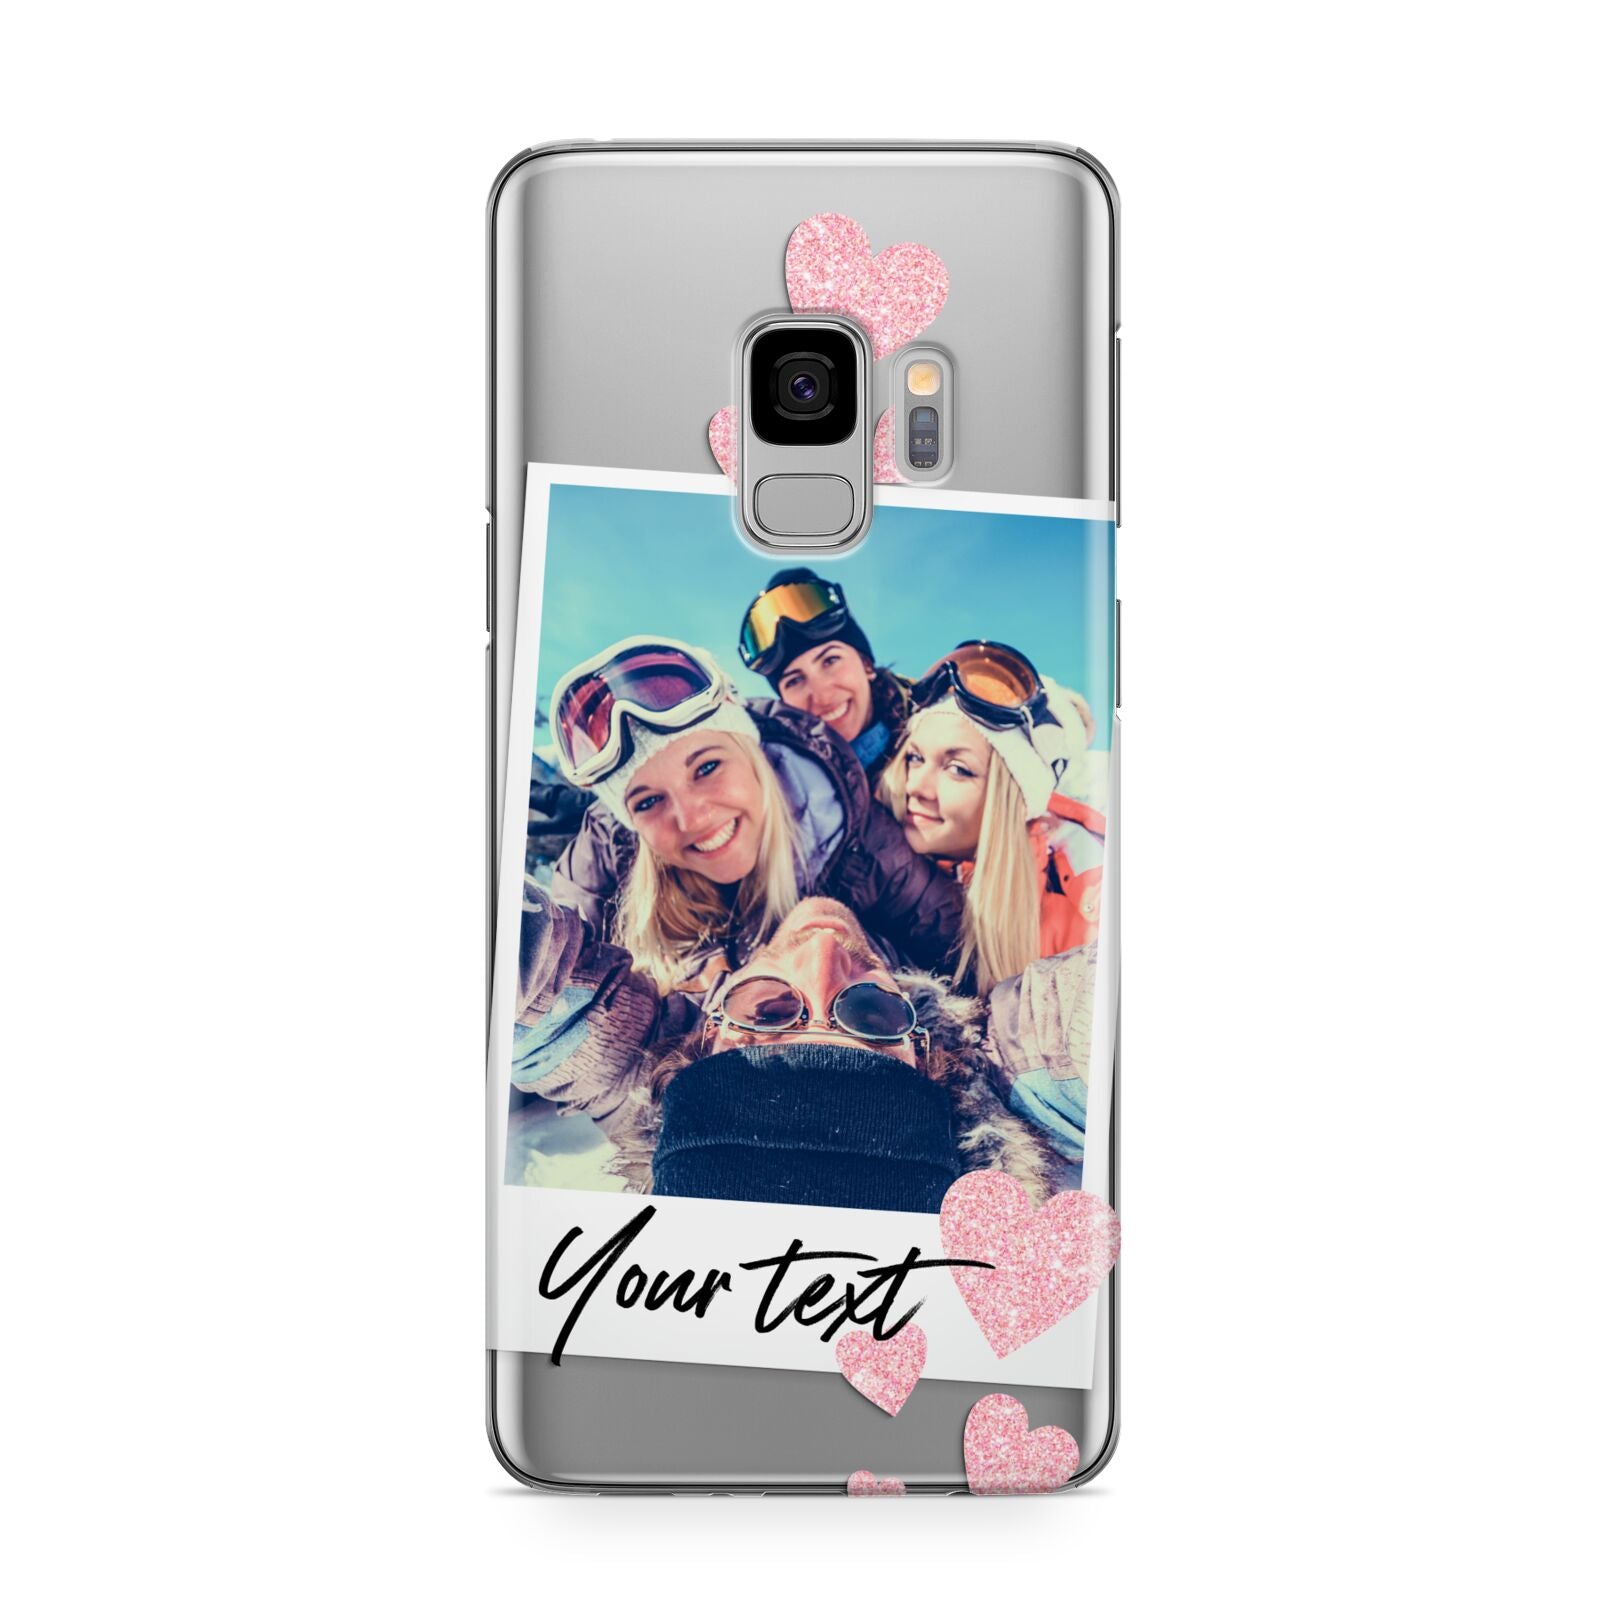 Photo with Text Samsung Galaxy S9 Case